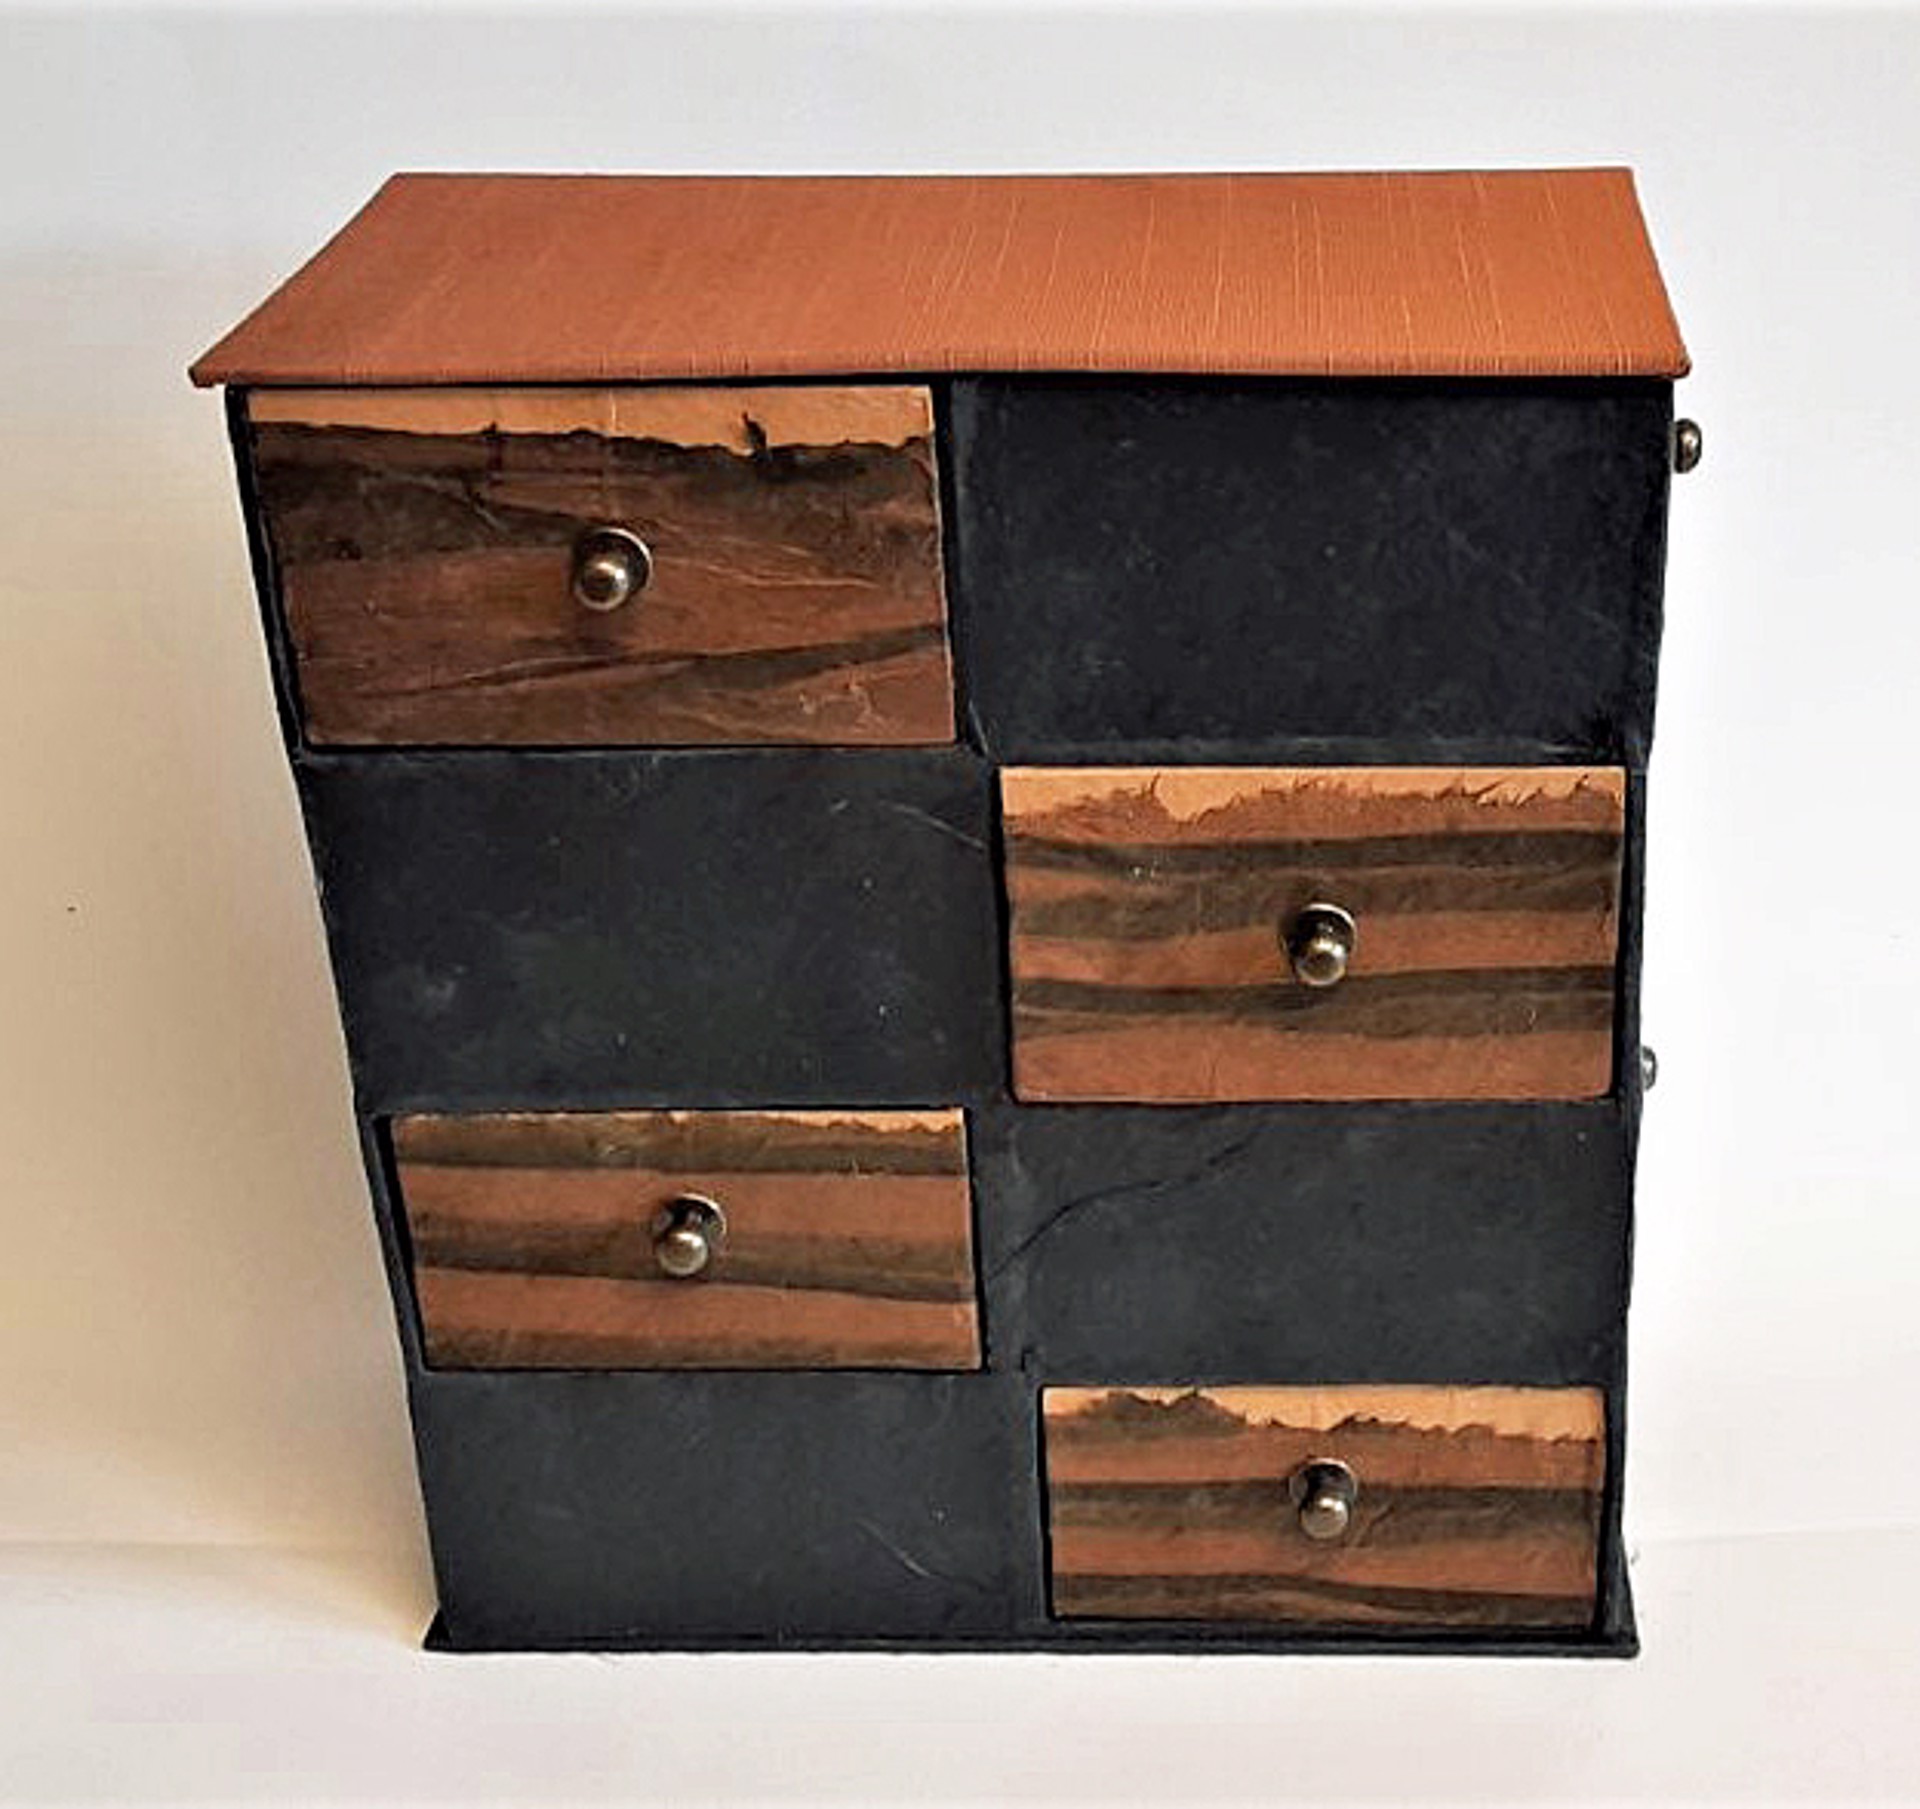 A Plethora of Drawers by Christine Trexel